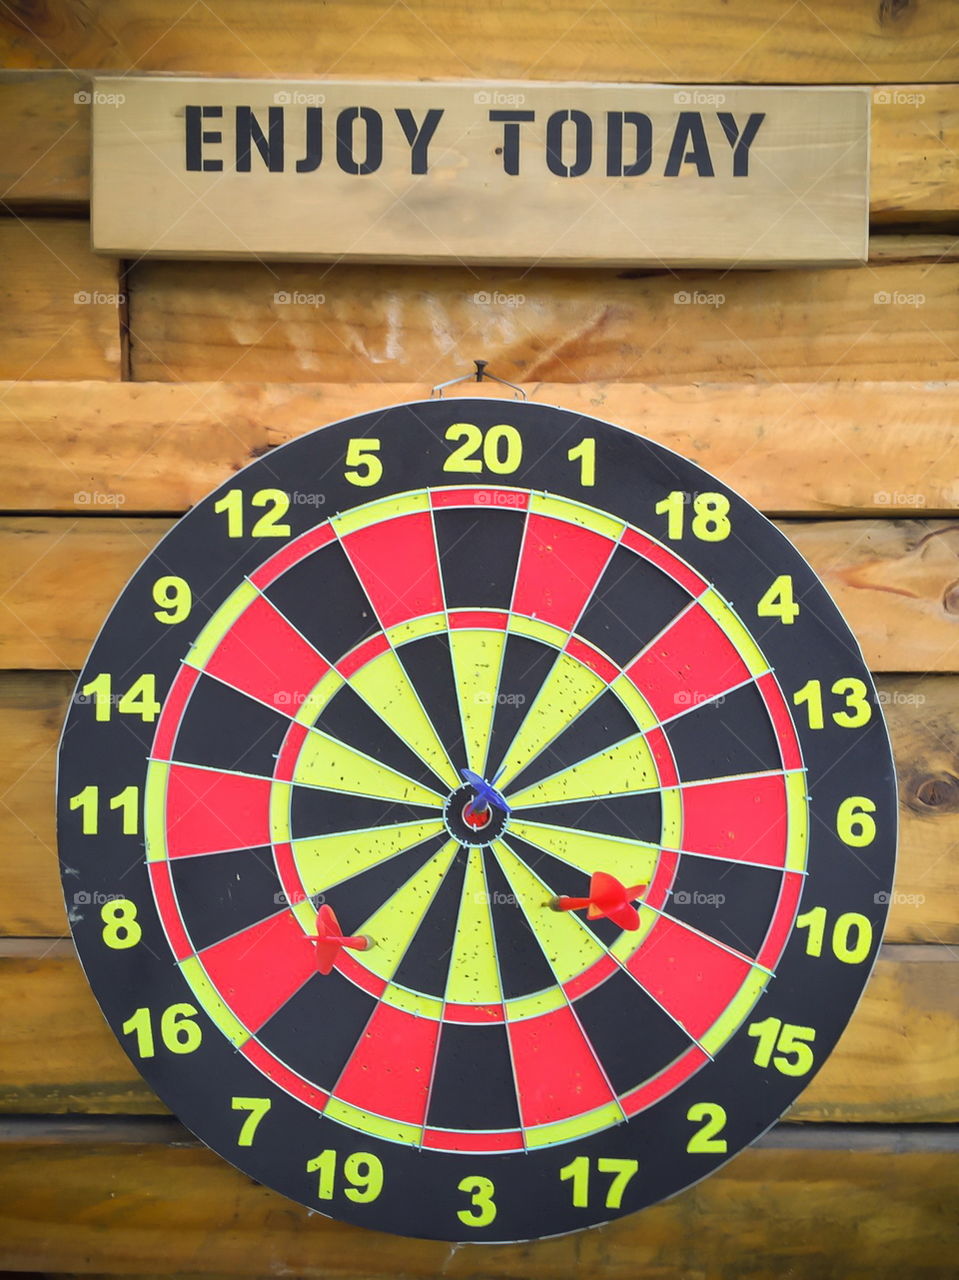 dart board for relax time.